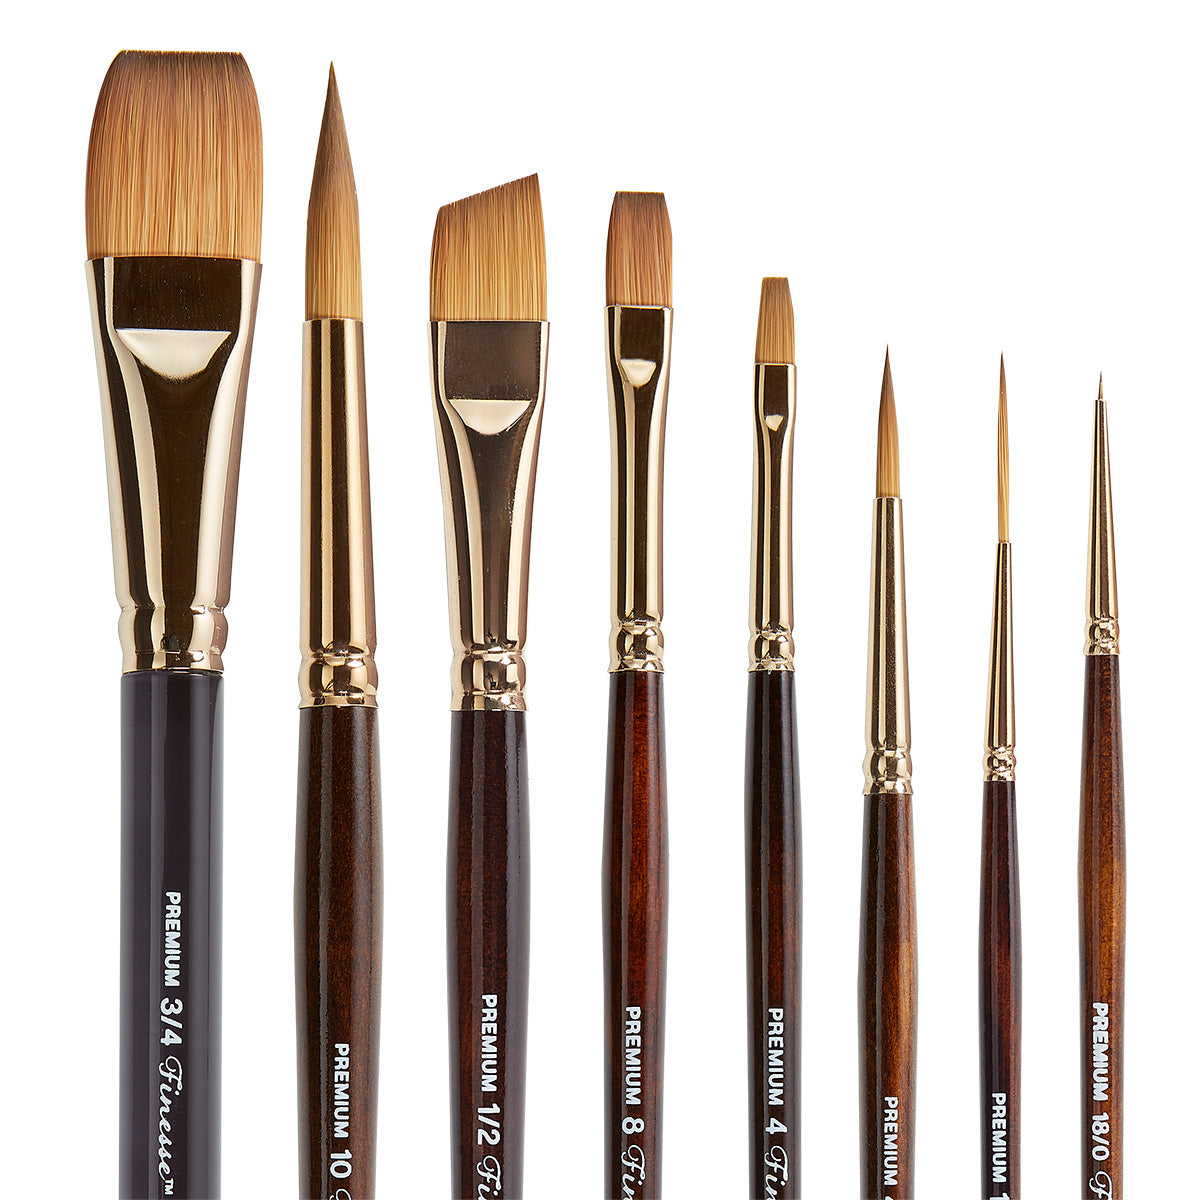 Set of 12 Sable Artist Brushes - 'The Oxford' (sizes 1-12), The Fine Art  Warehouse